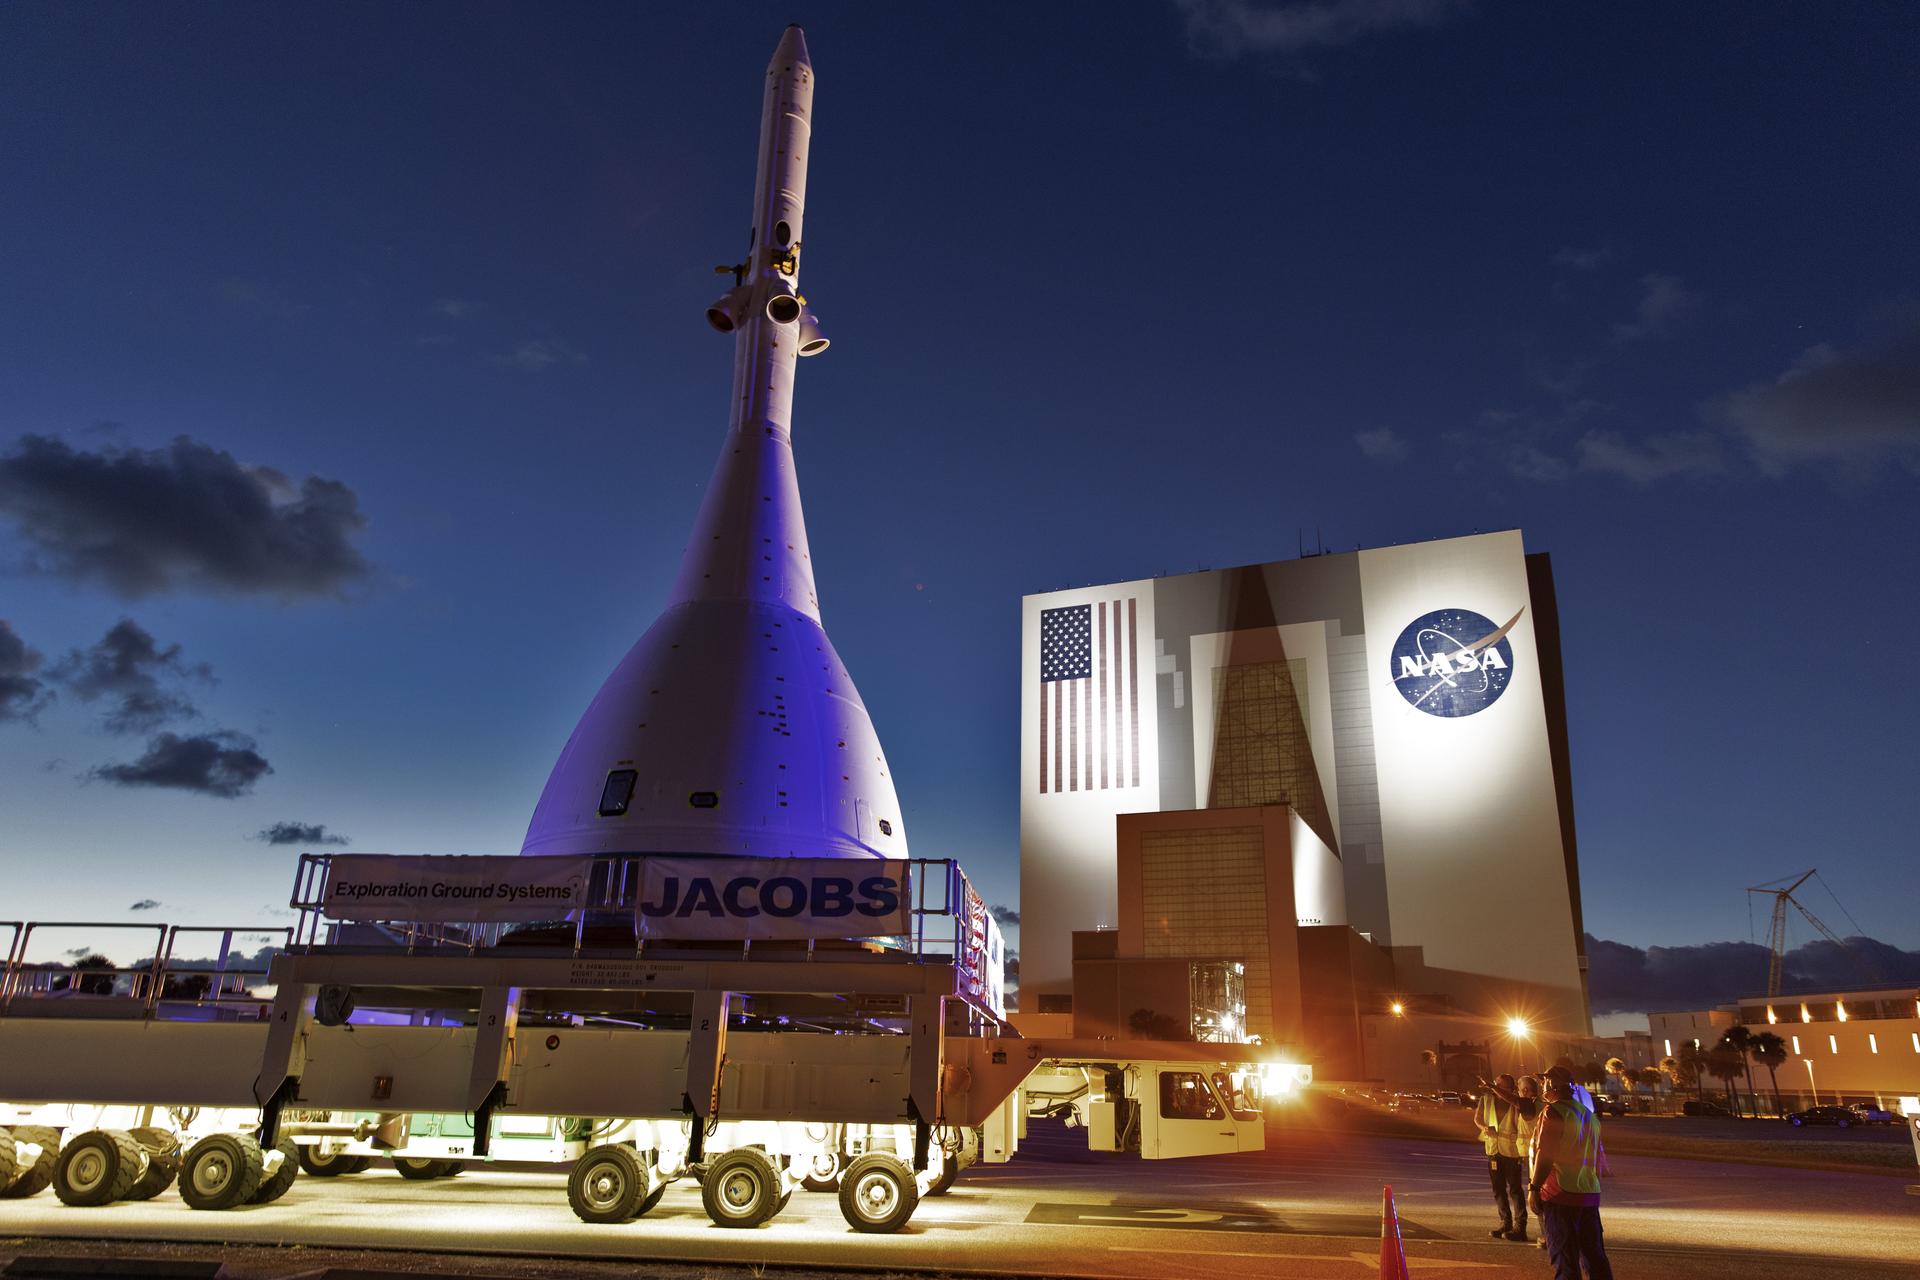 The test version of Orion attached to the Launch Abort System for AA-2 passes by the Vehicle Assembly Building.